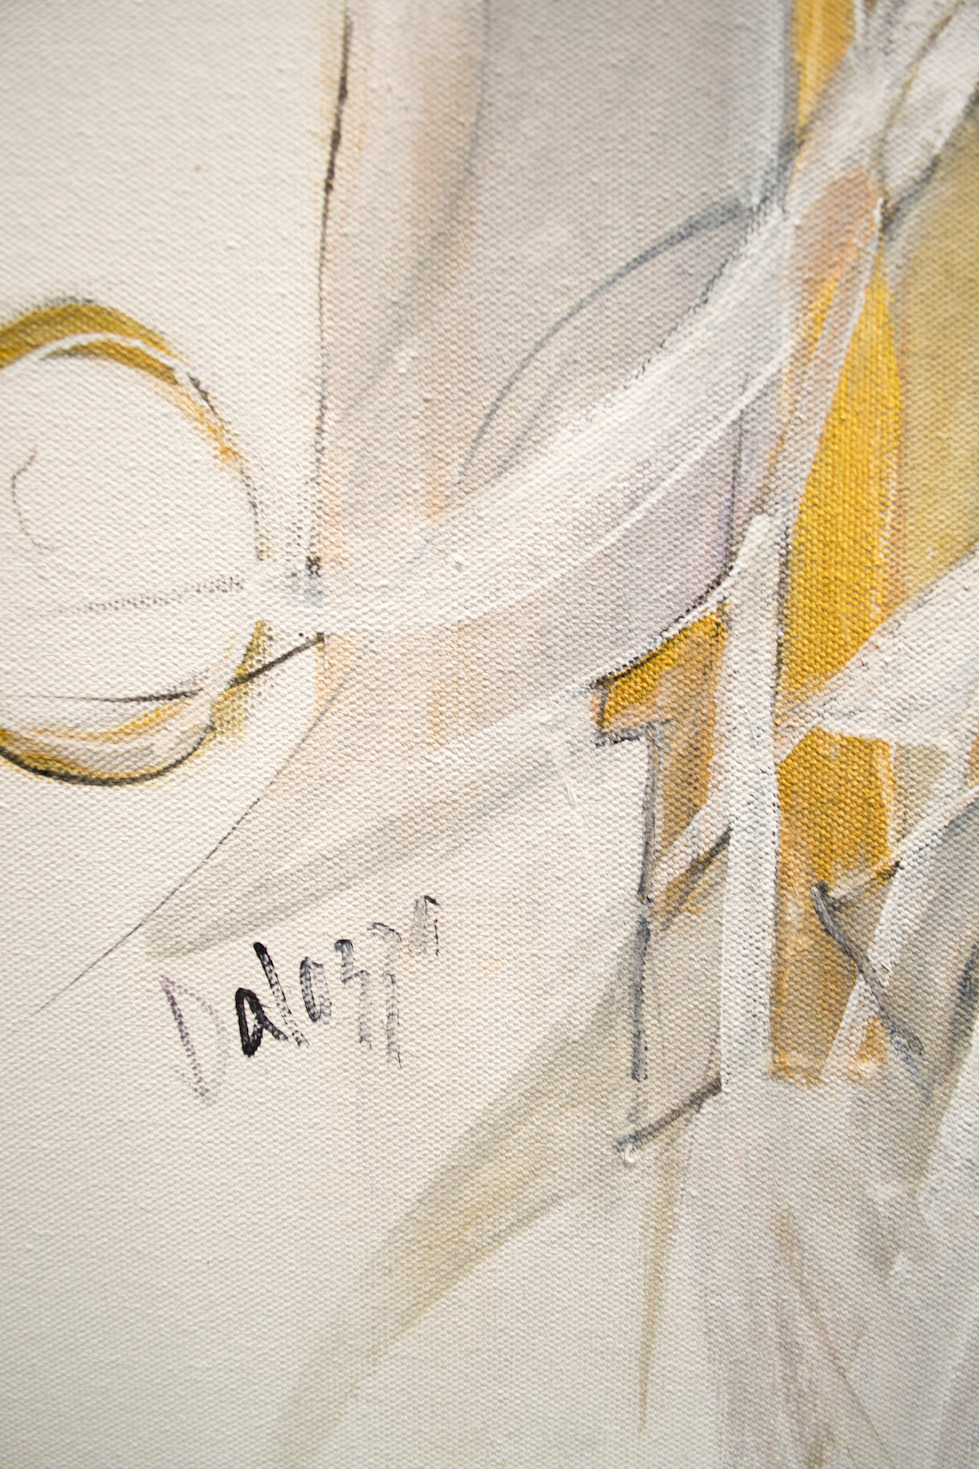 Close Up Signature Of Mixed Media Painting "Bodyscape" By Lucette Dalozzo